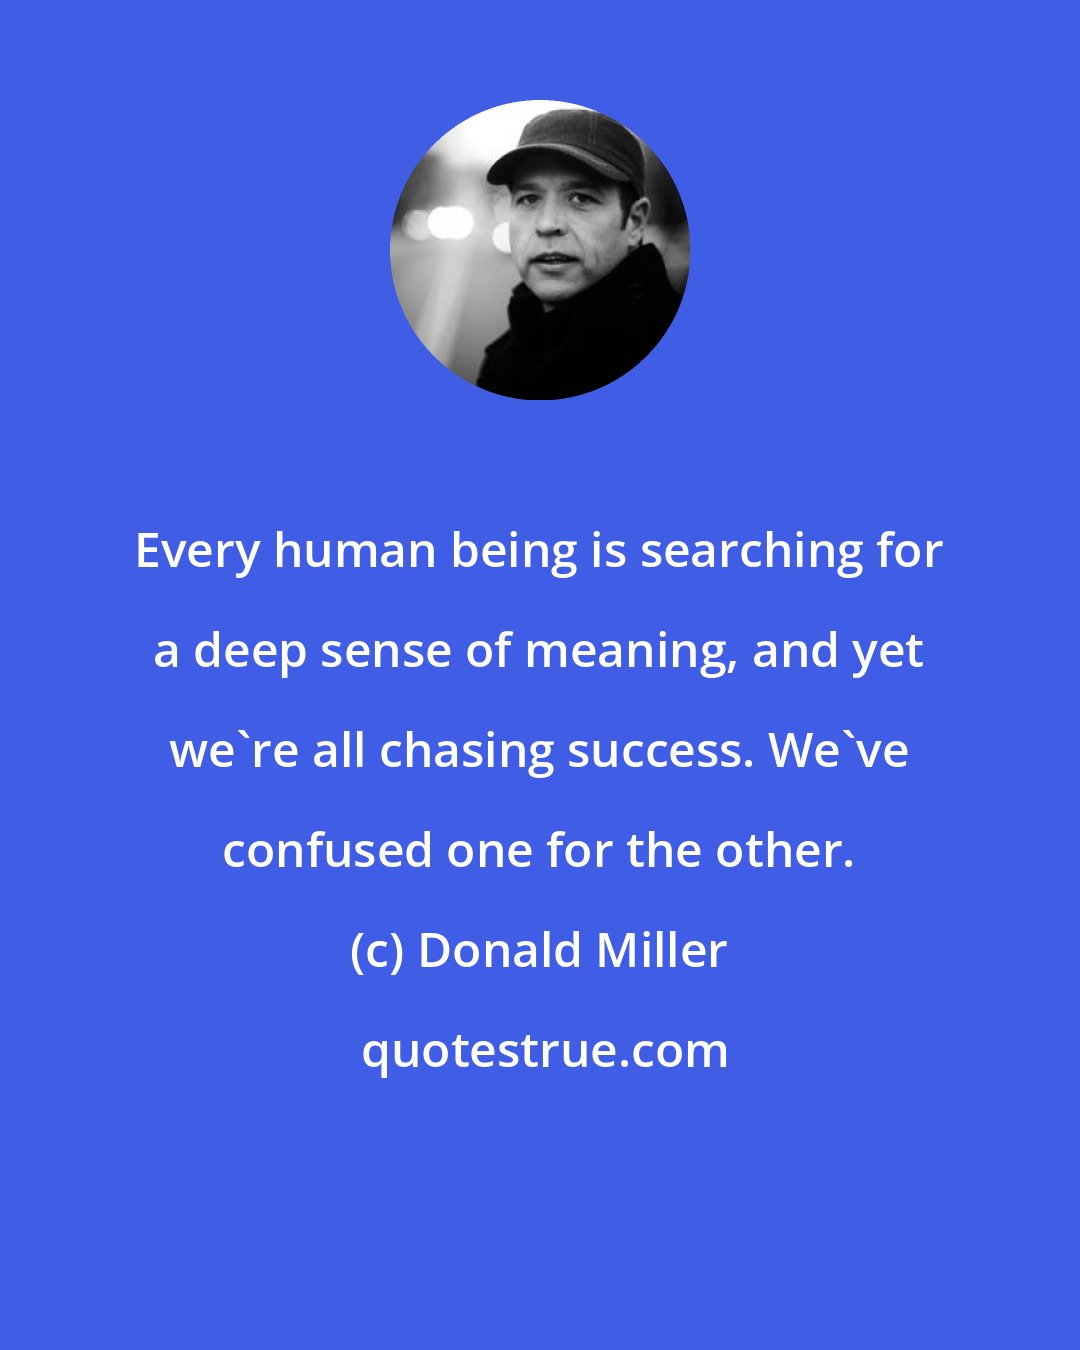 Donald Miller: Every human being is searching for a deep sense of meaning, and yet we're all chasing success. We've confused one for the other.